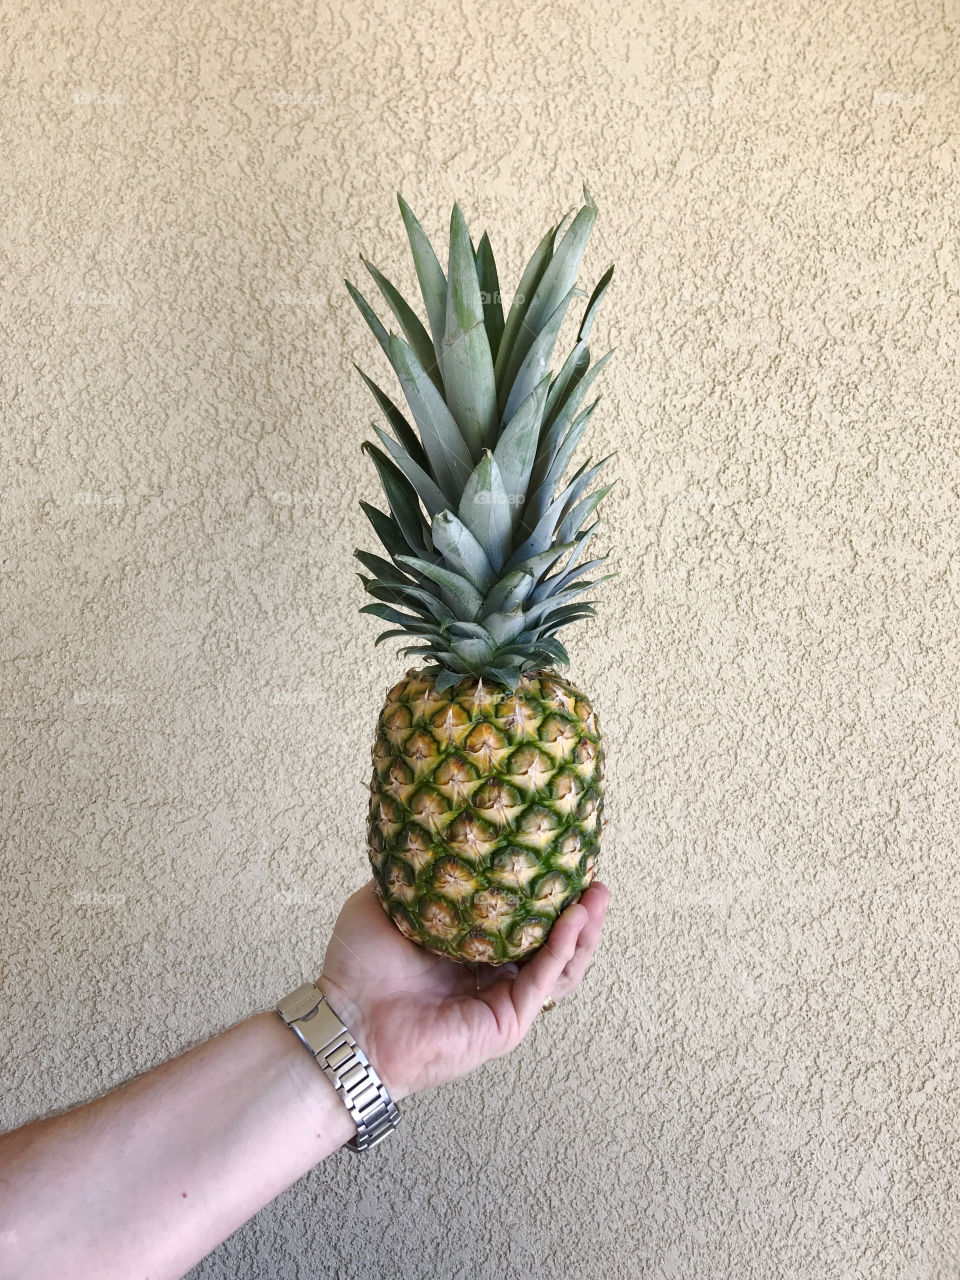 A hand holding a medium size pineapple on the porch!